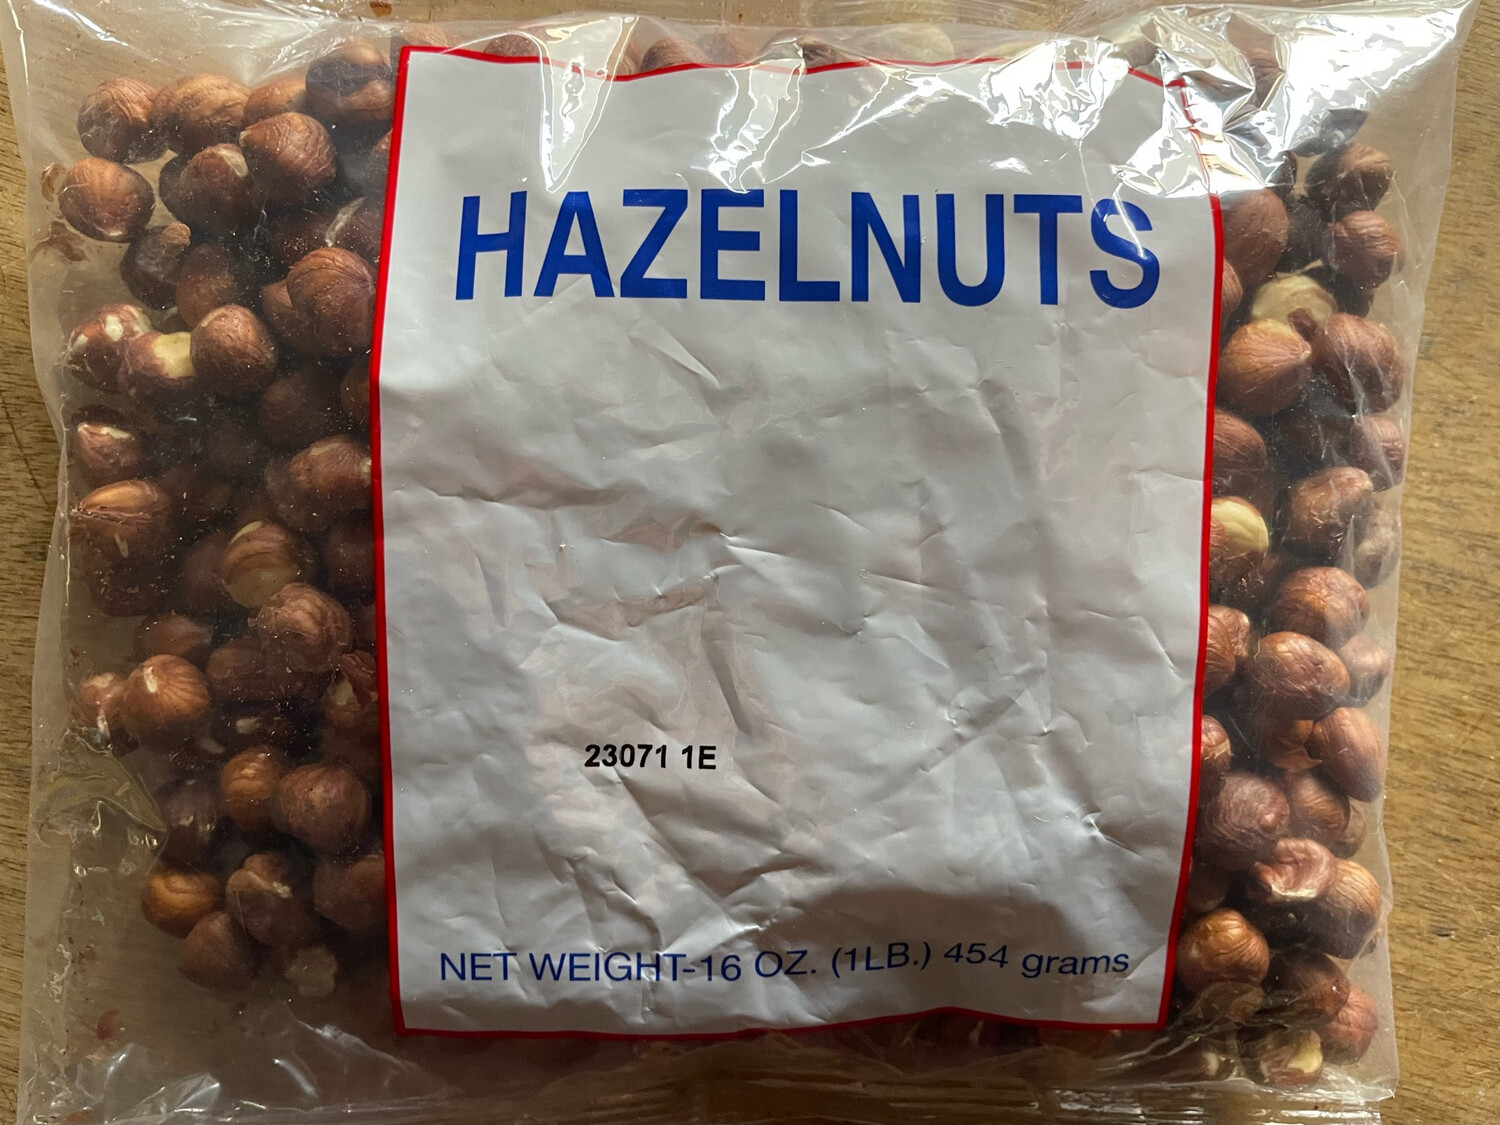 Nuts
(*LIMIT 2 per household*)